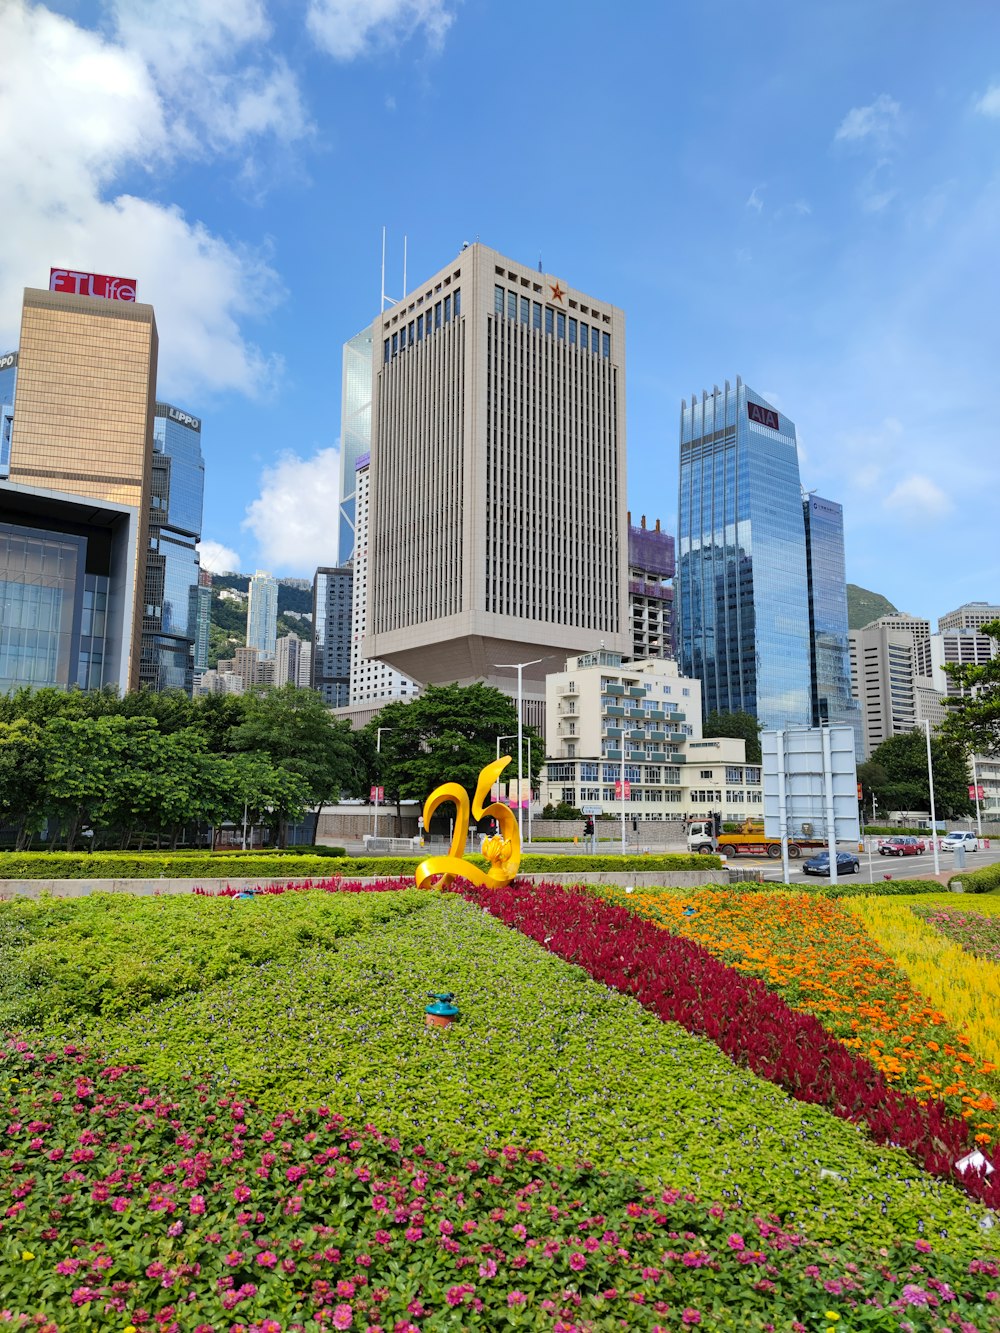 a large flower bed in front of a city